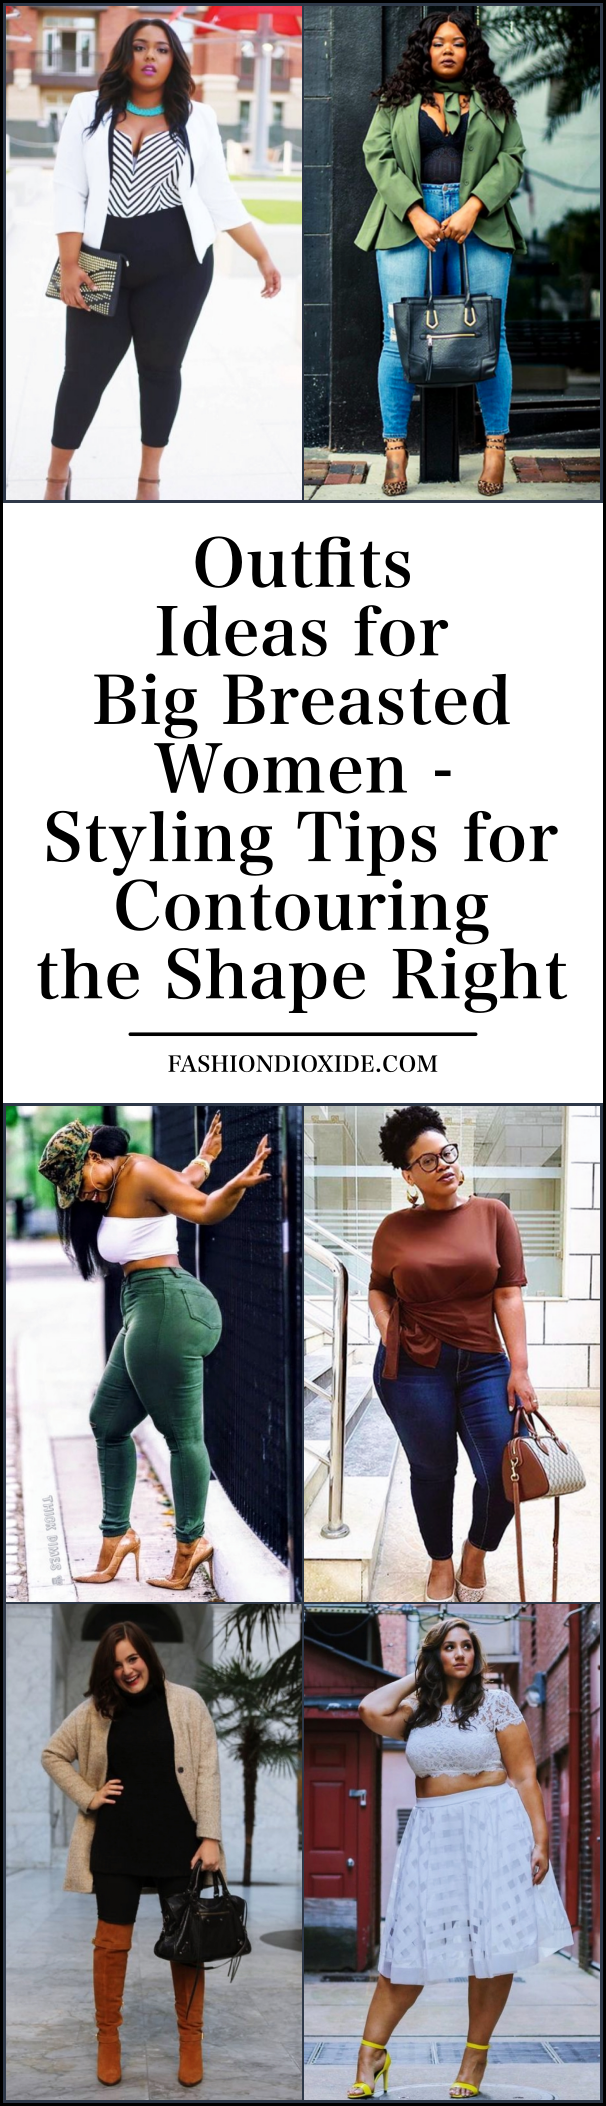 Outfits Ideas for Big Breasted Women | Styling Tips for Contouring the Shape Right